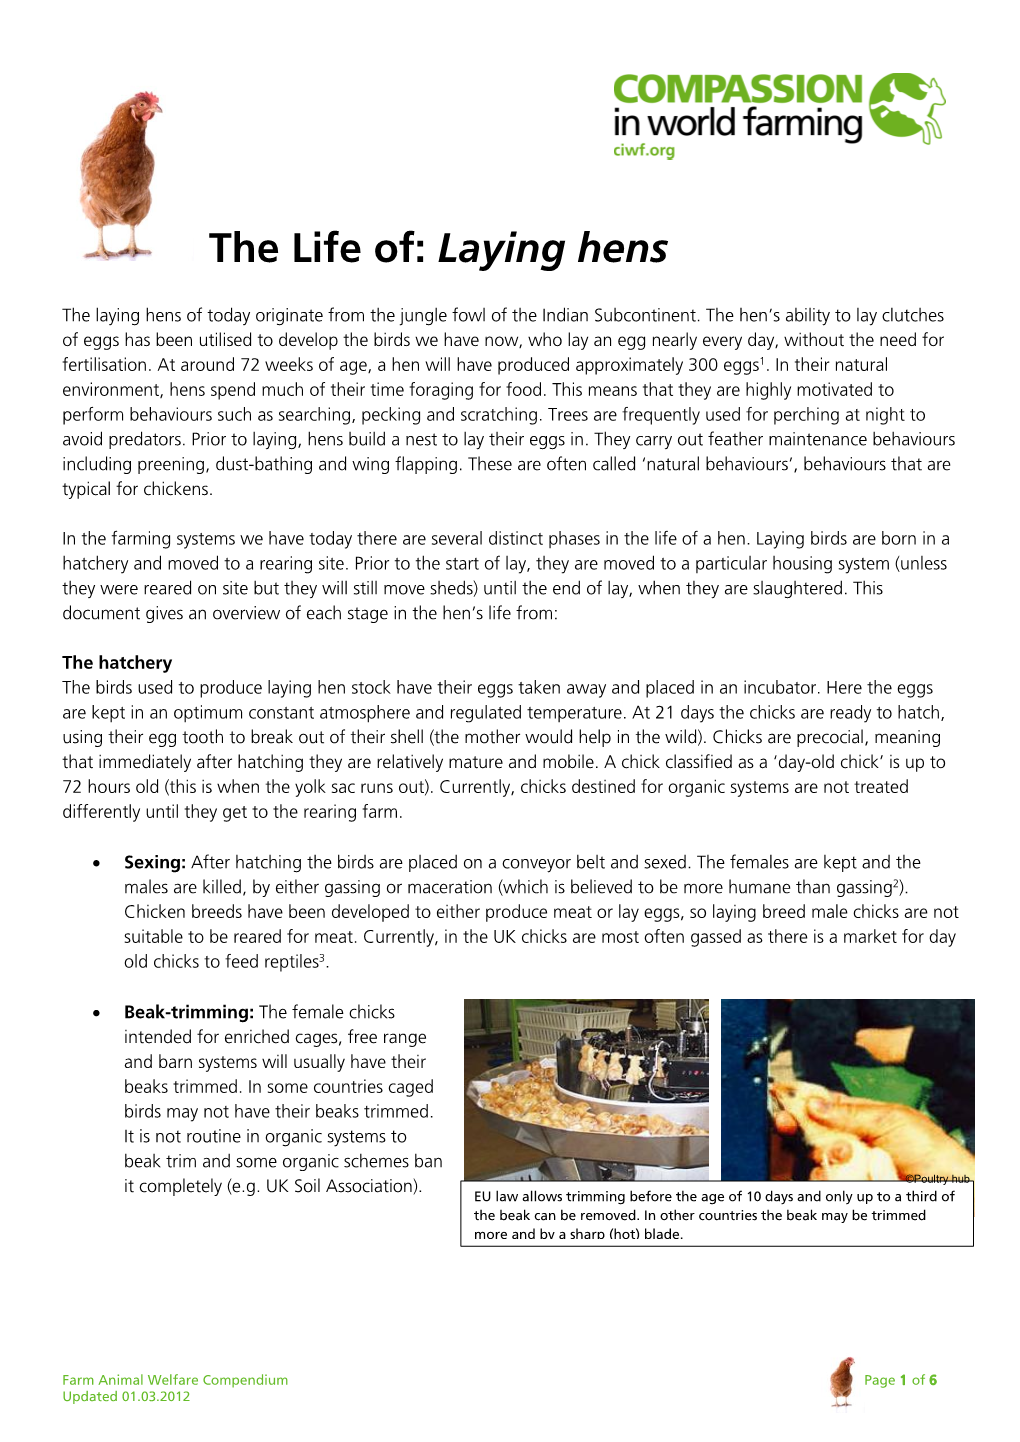 The Life Of: Laying Hens